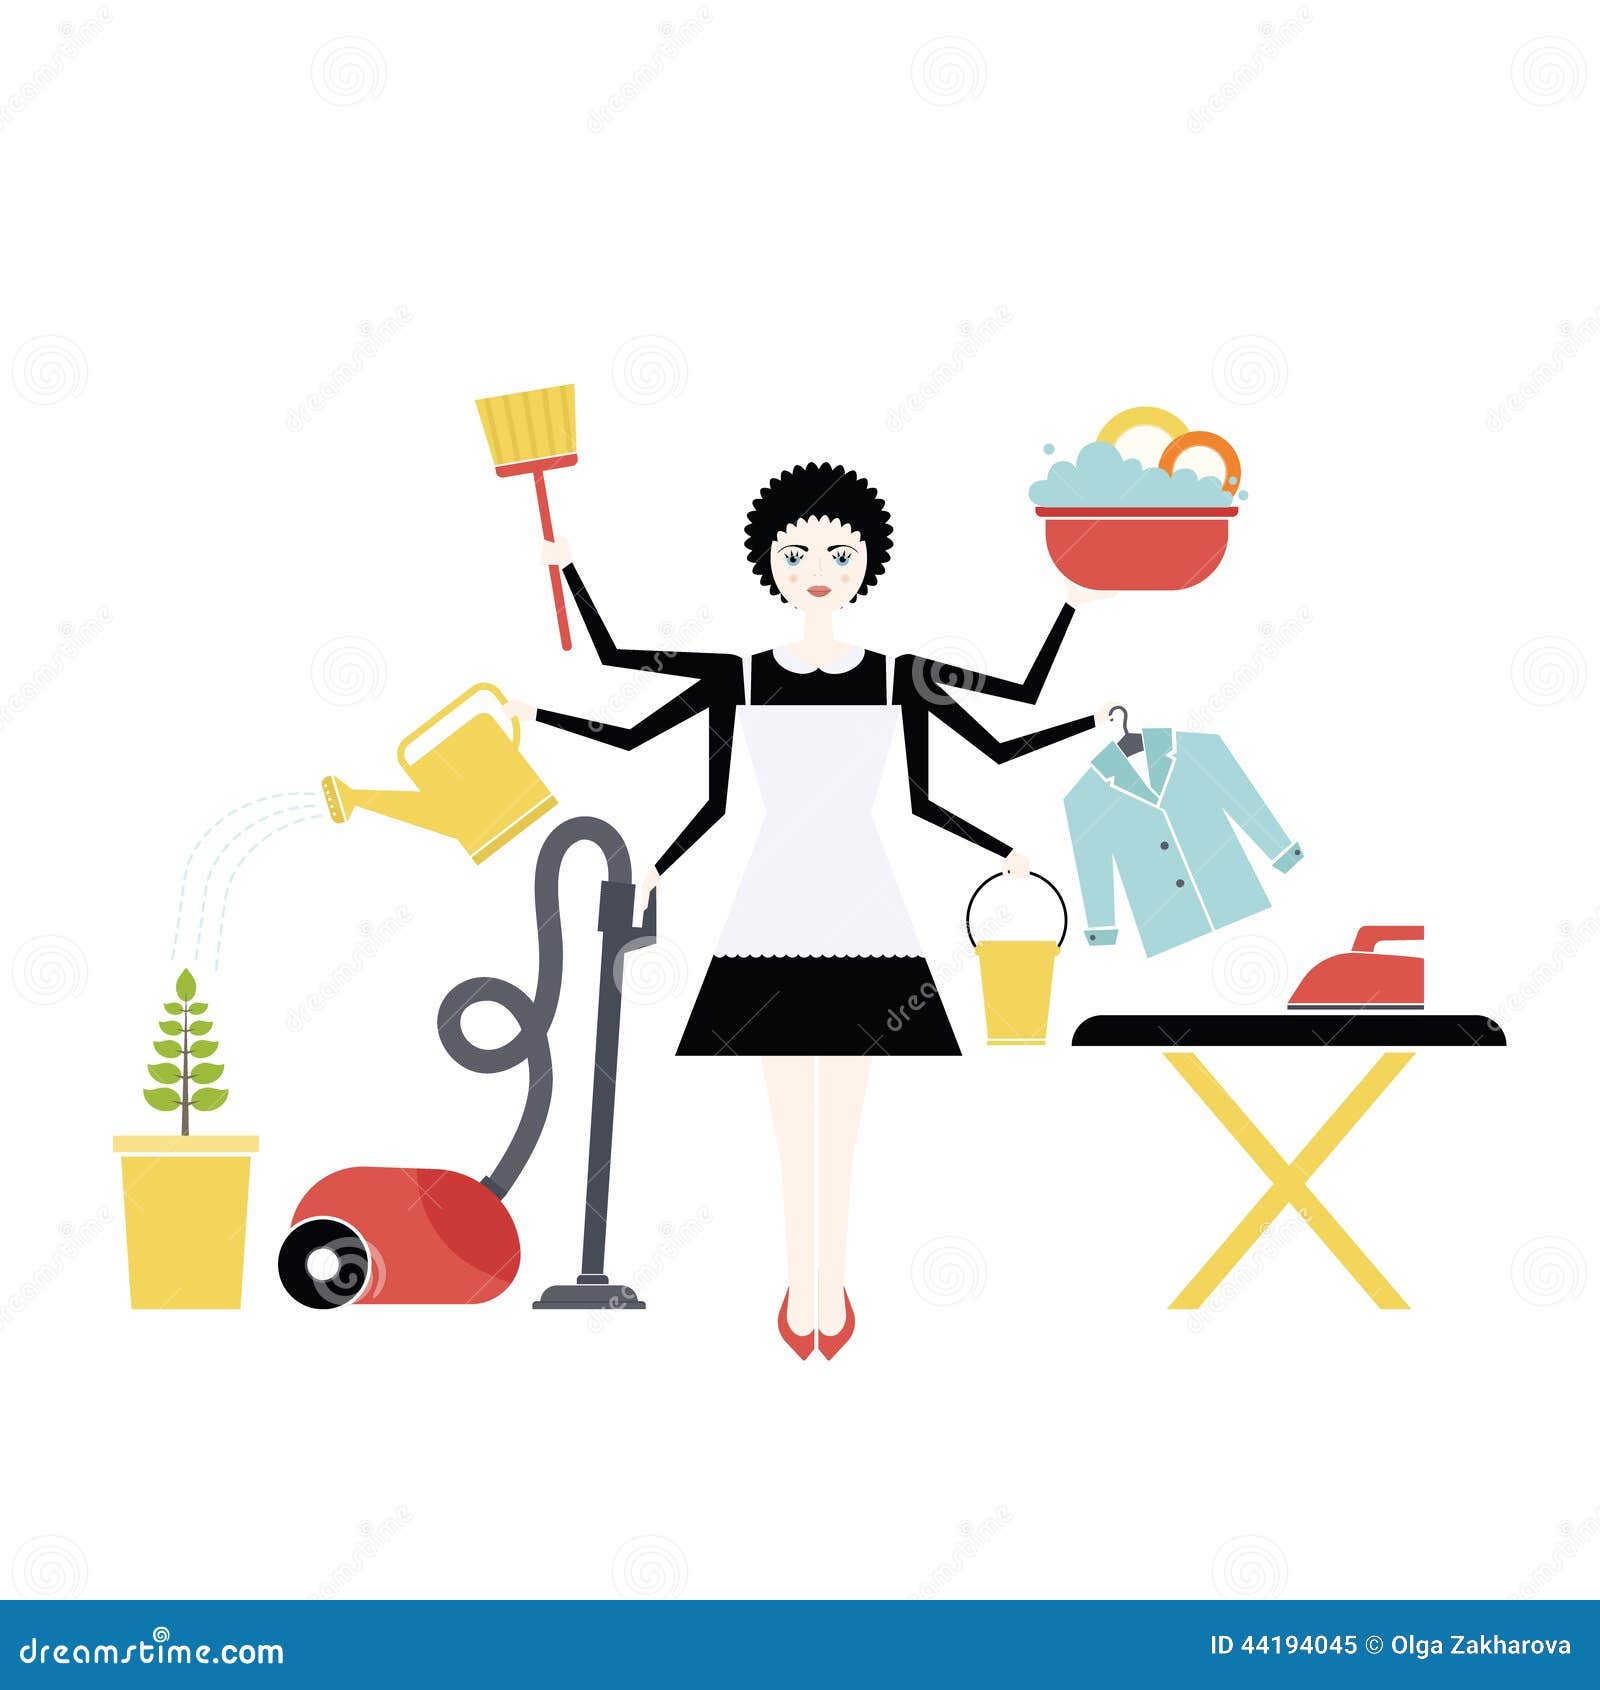 clipart housekeeping - photo #36